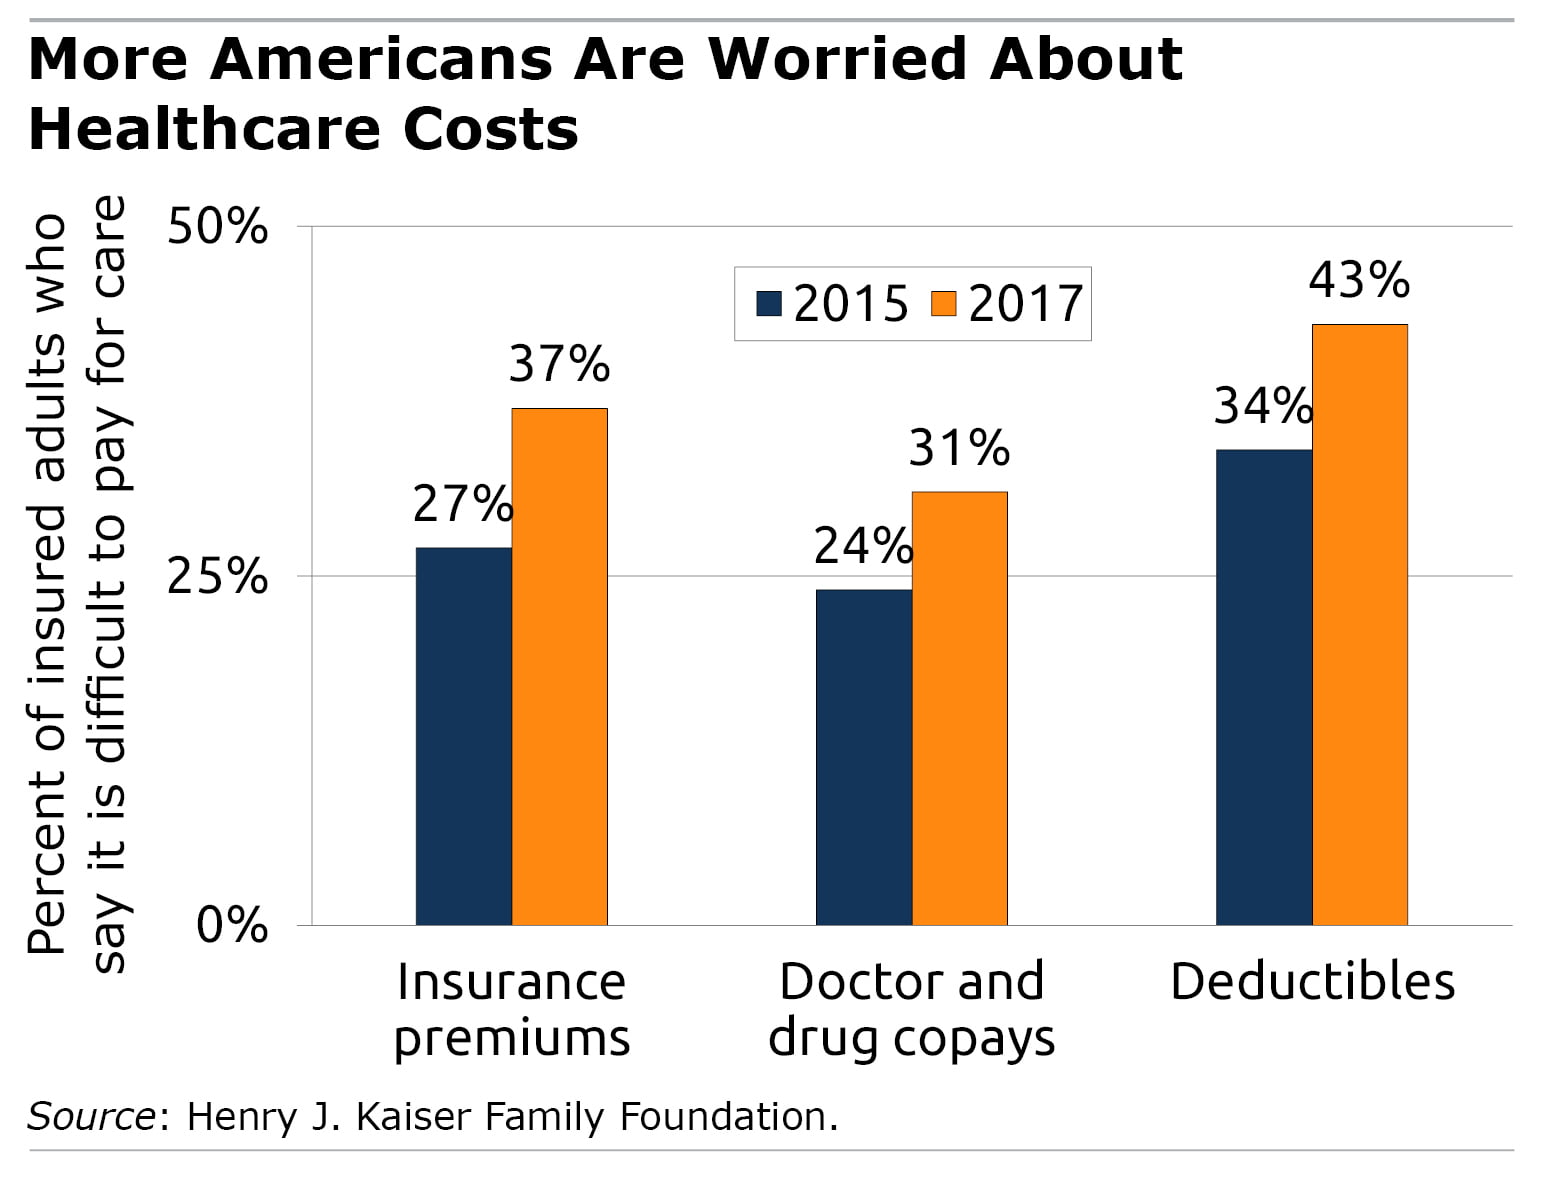 More American Are Worried About Healthcare Costs